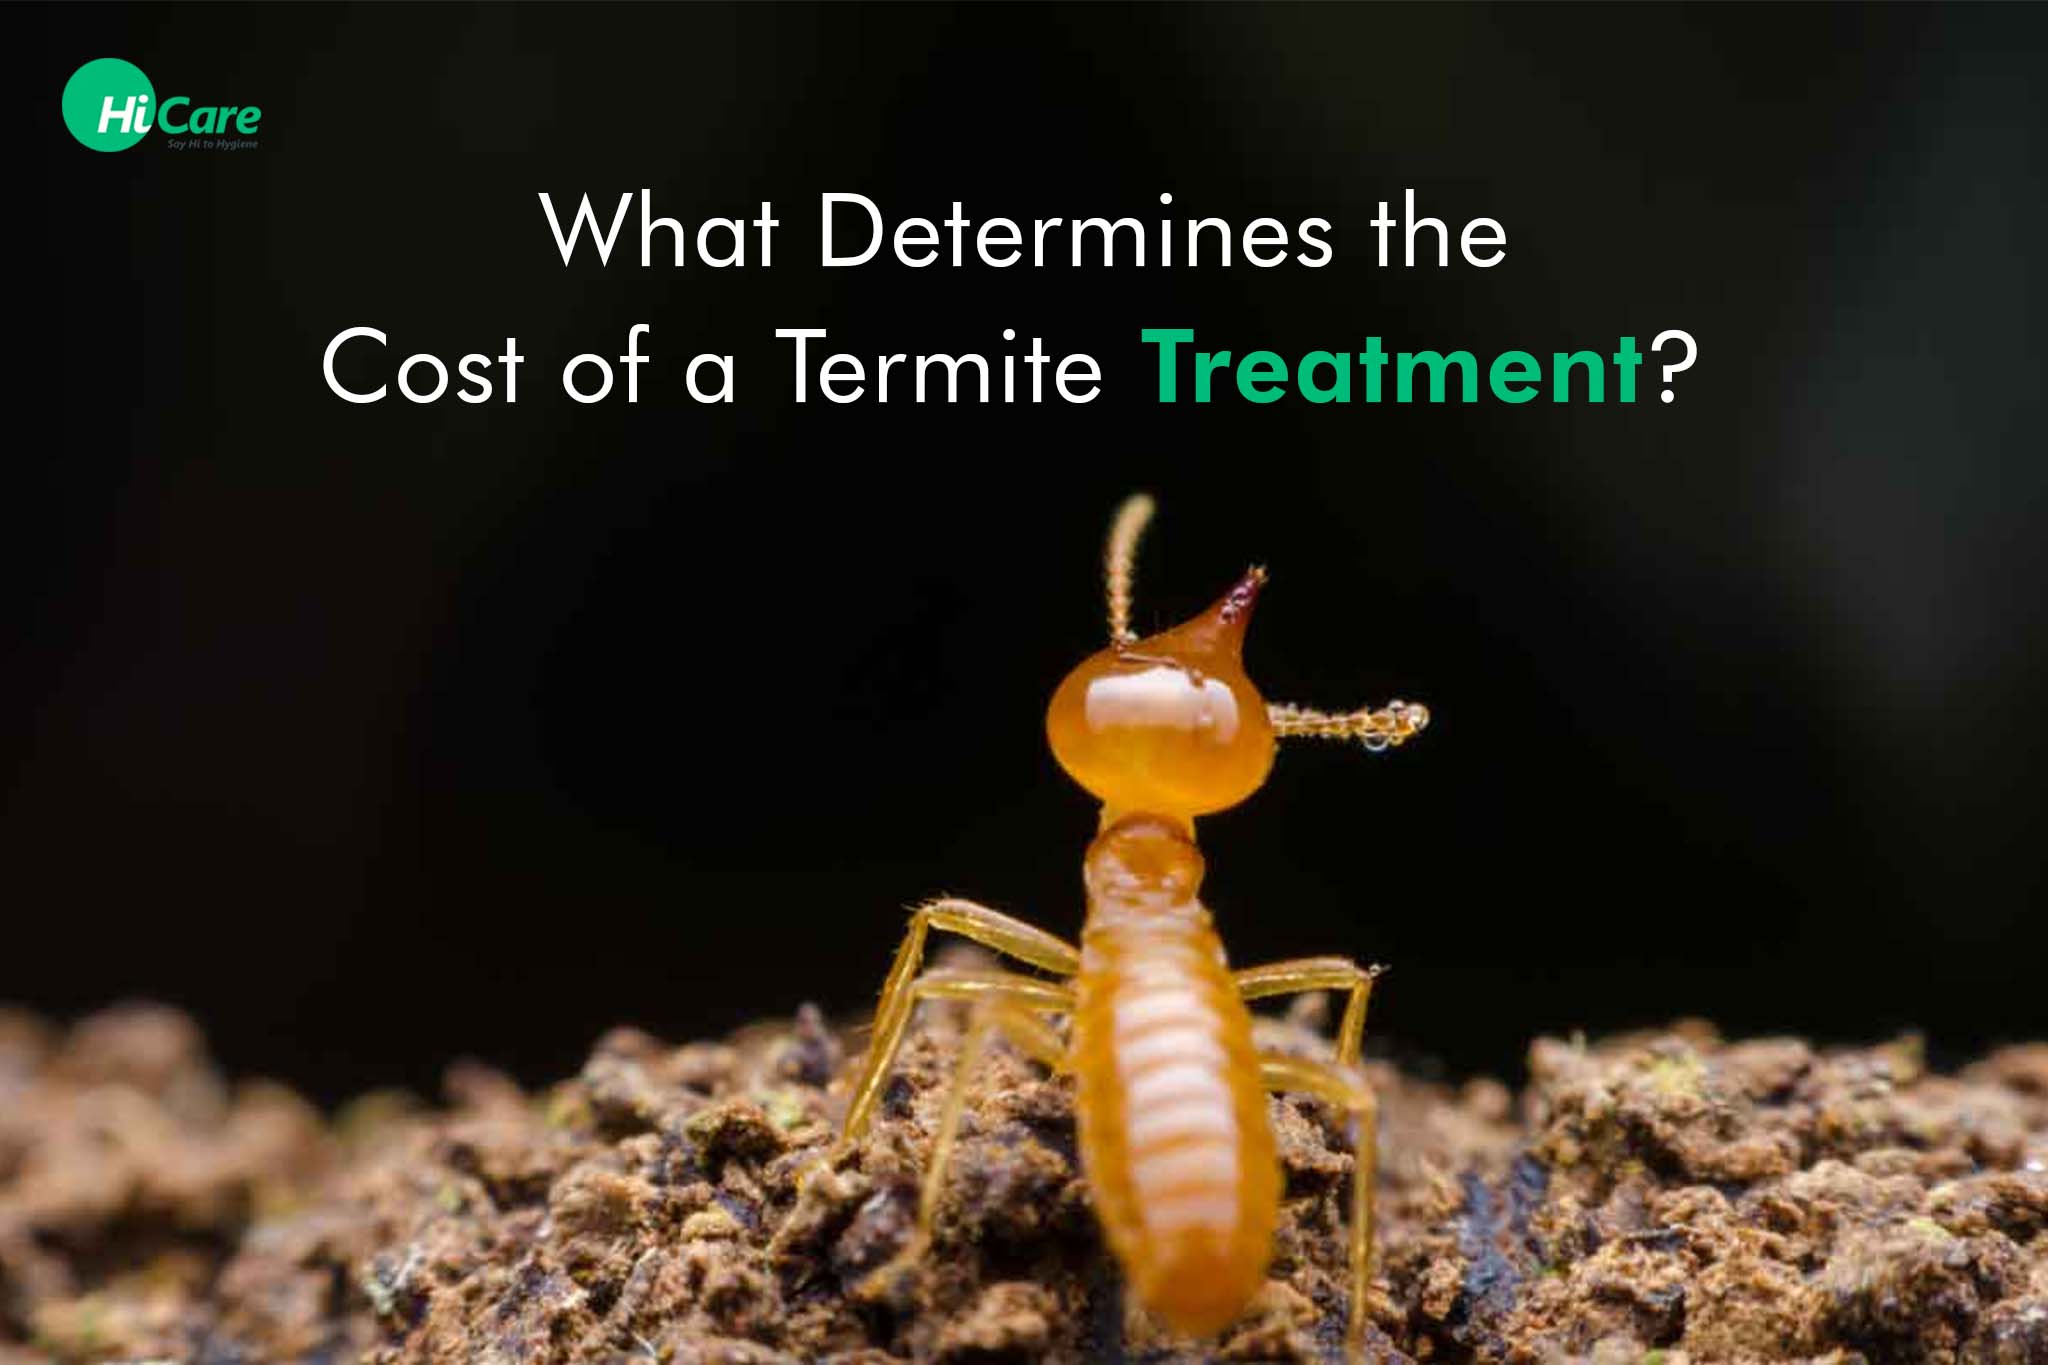 What Determines the Cost of a Termite Treatment?